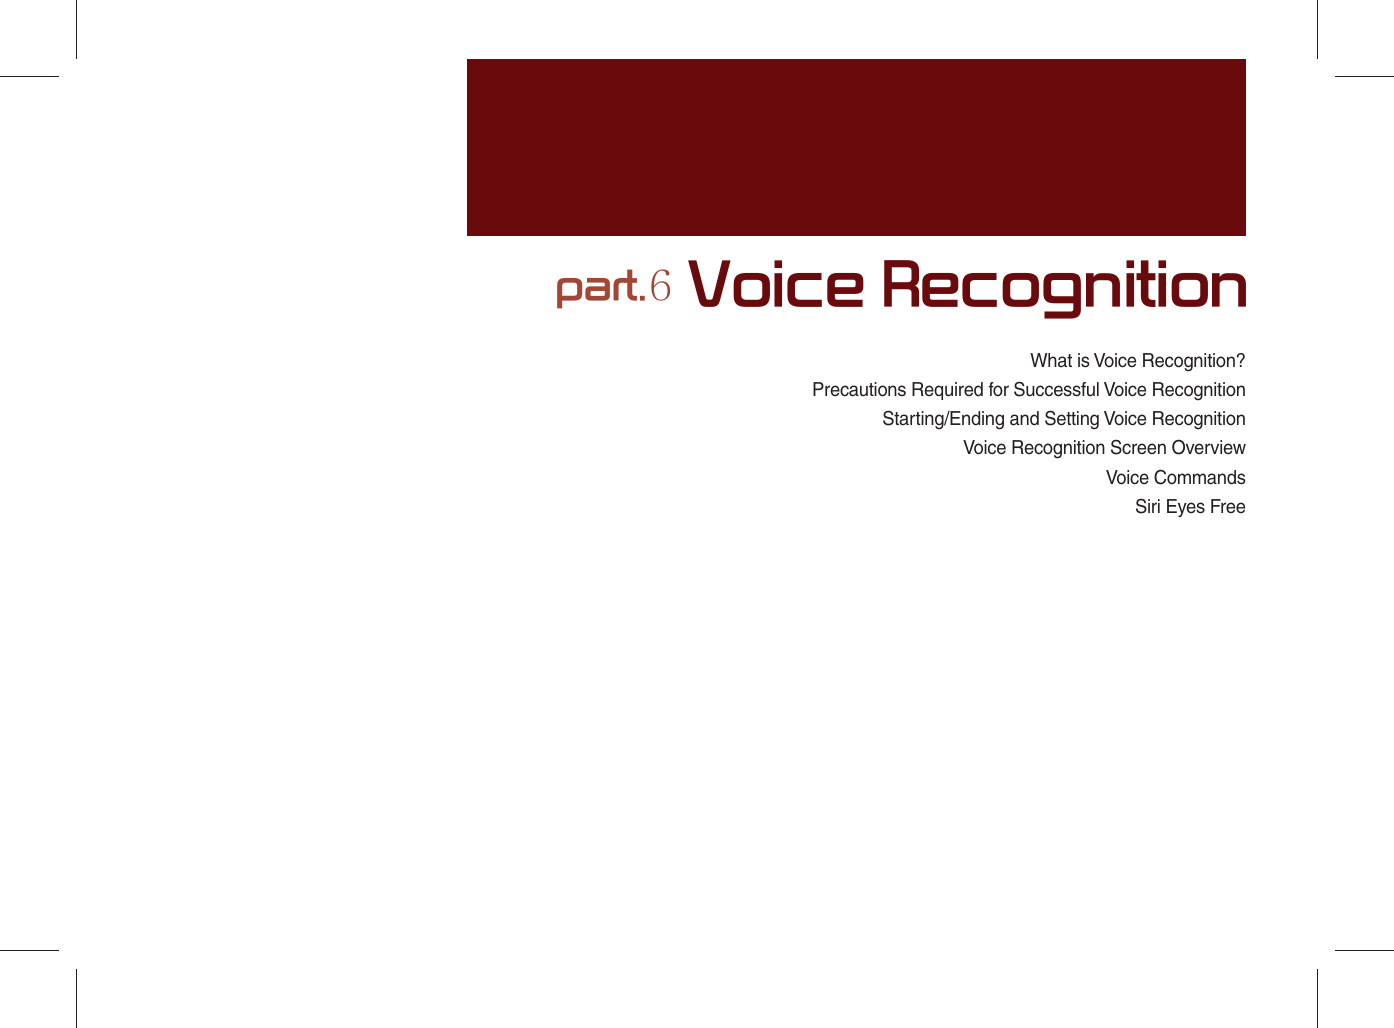 What is Voice Recognition?Precautions Required for Successful Voice RecognitionStarting/Ending and Setting Voice RecognitionVoice Recognition Screen OverviewVoice CommandsSiri Eyes Free part.6 Voice Recognition